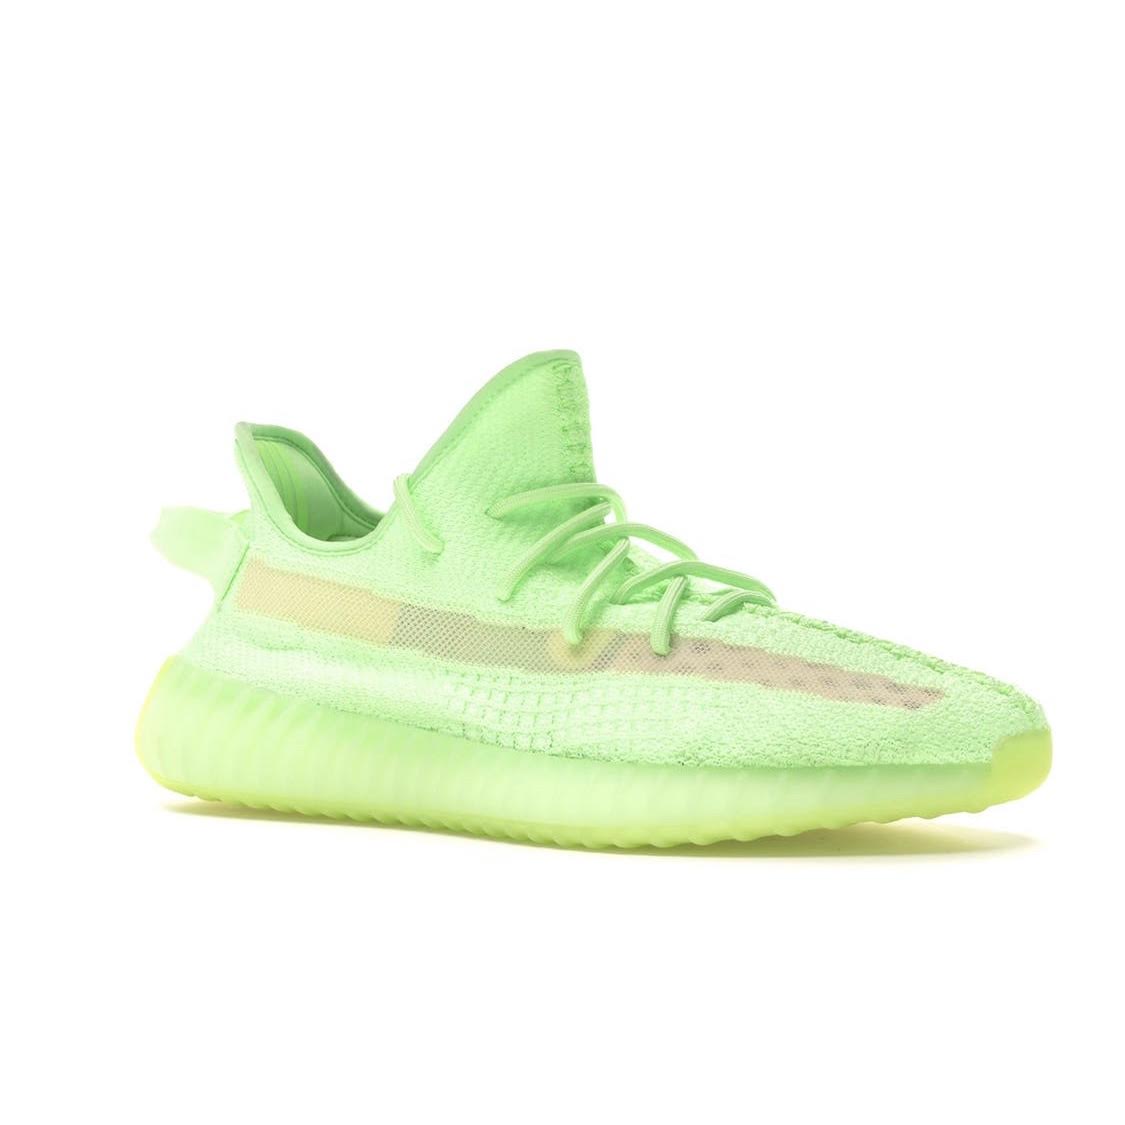 Yeezy x Adidas Neon Green Knit Fabric Boost 350 V2 Glow Sneakers